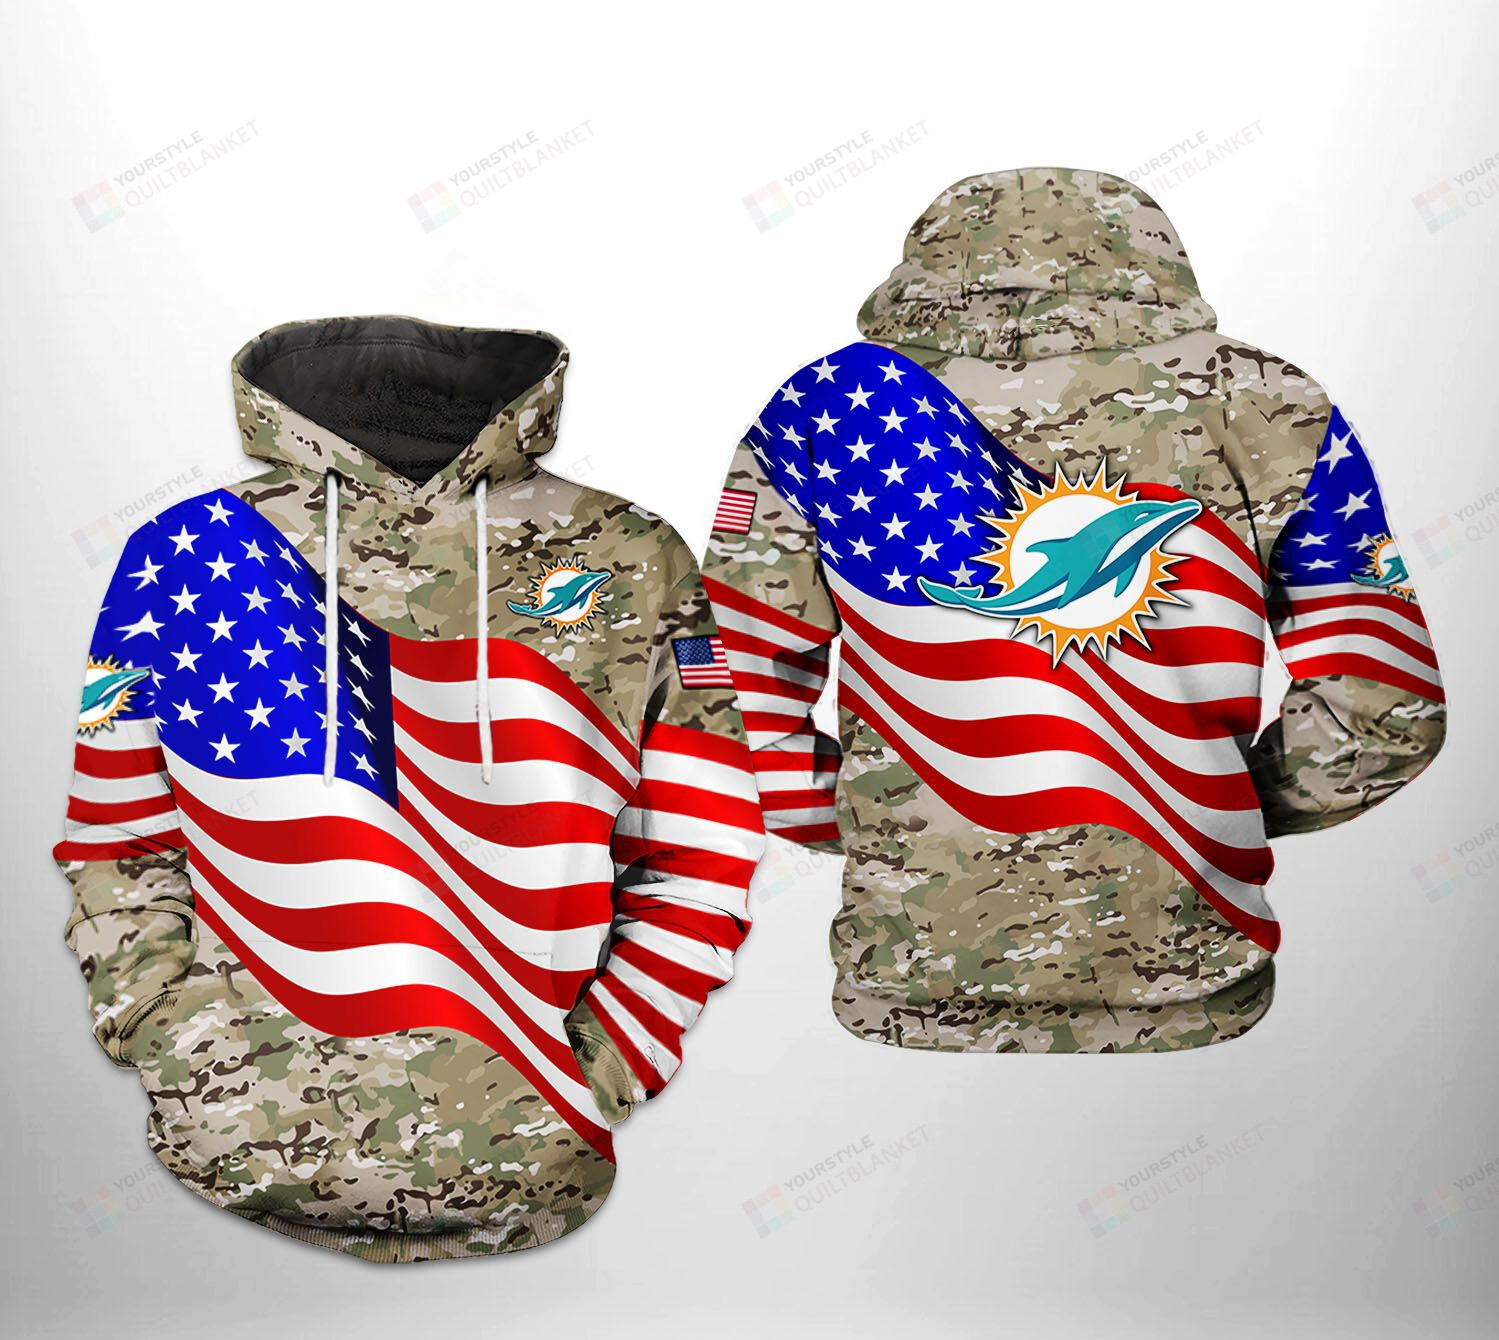 Miami Dolphins Shop - Miami Dolphins NFL US Flag Camo Veteran Team 3D All Over Print Hoodie Zip up Hoodie